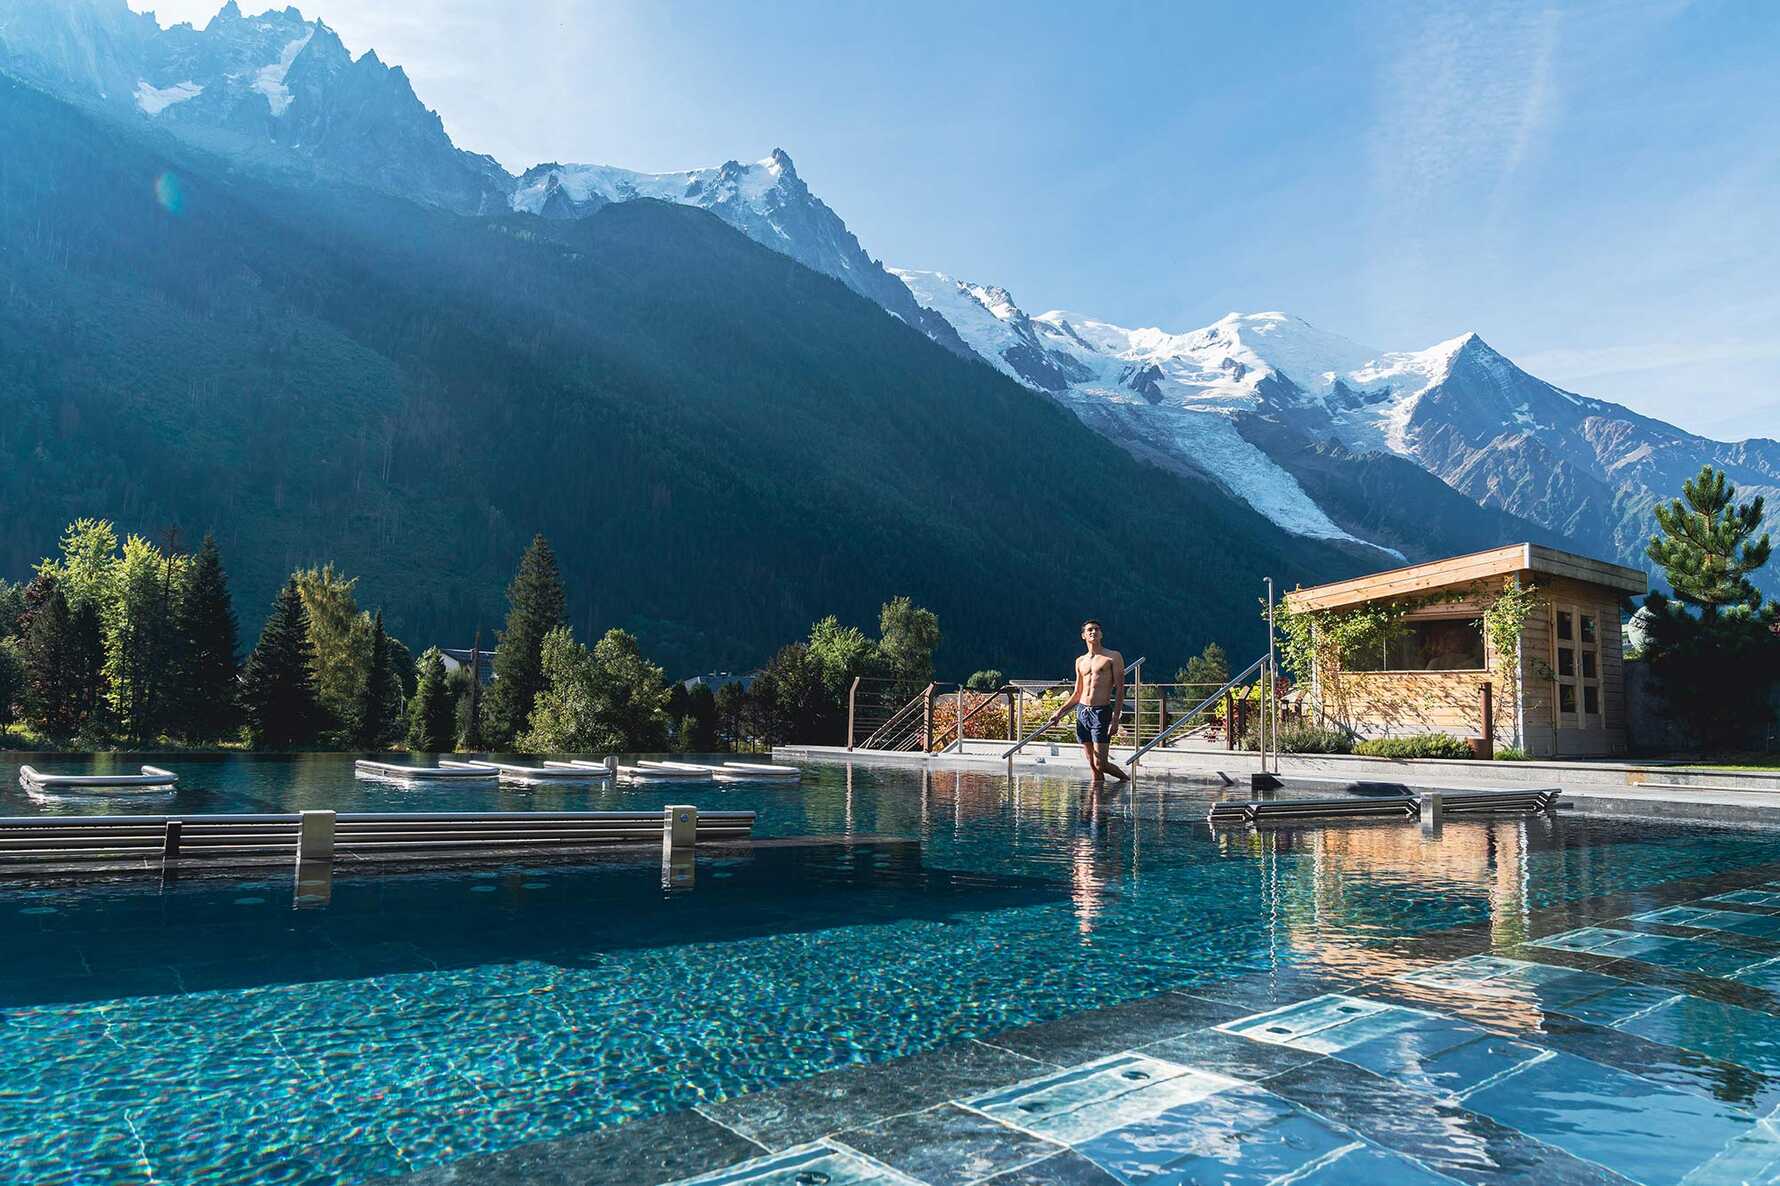 The outdoor pool at QC Therme spa in Chamonix